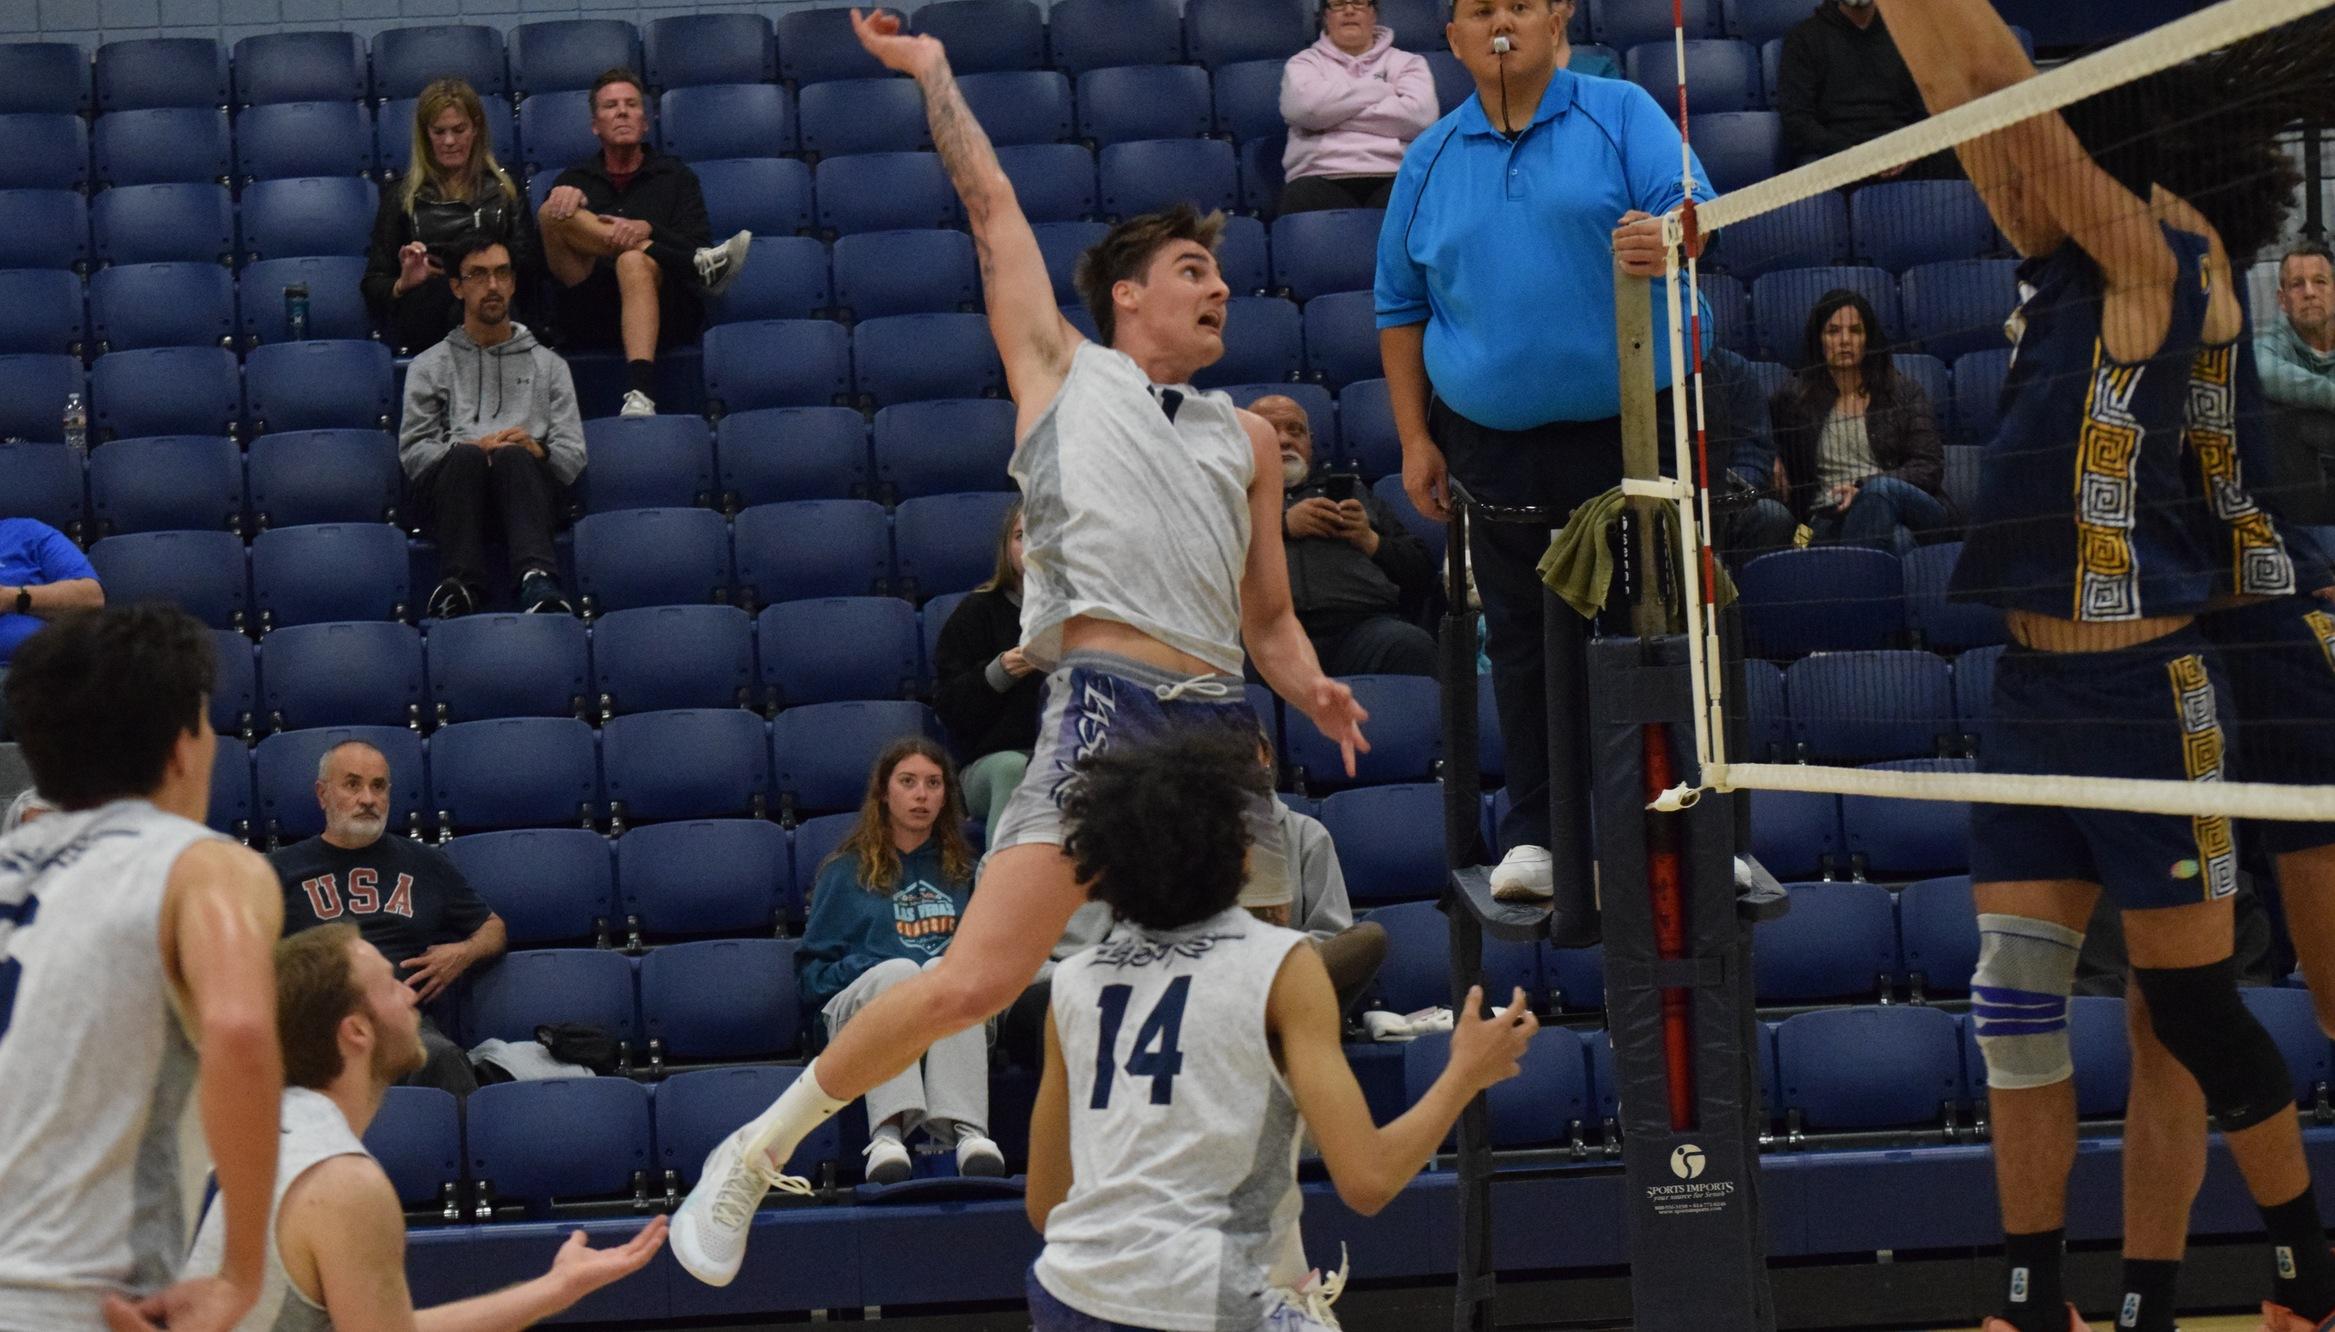 Men's volleyball team moves up to tied for third in state poll